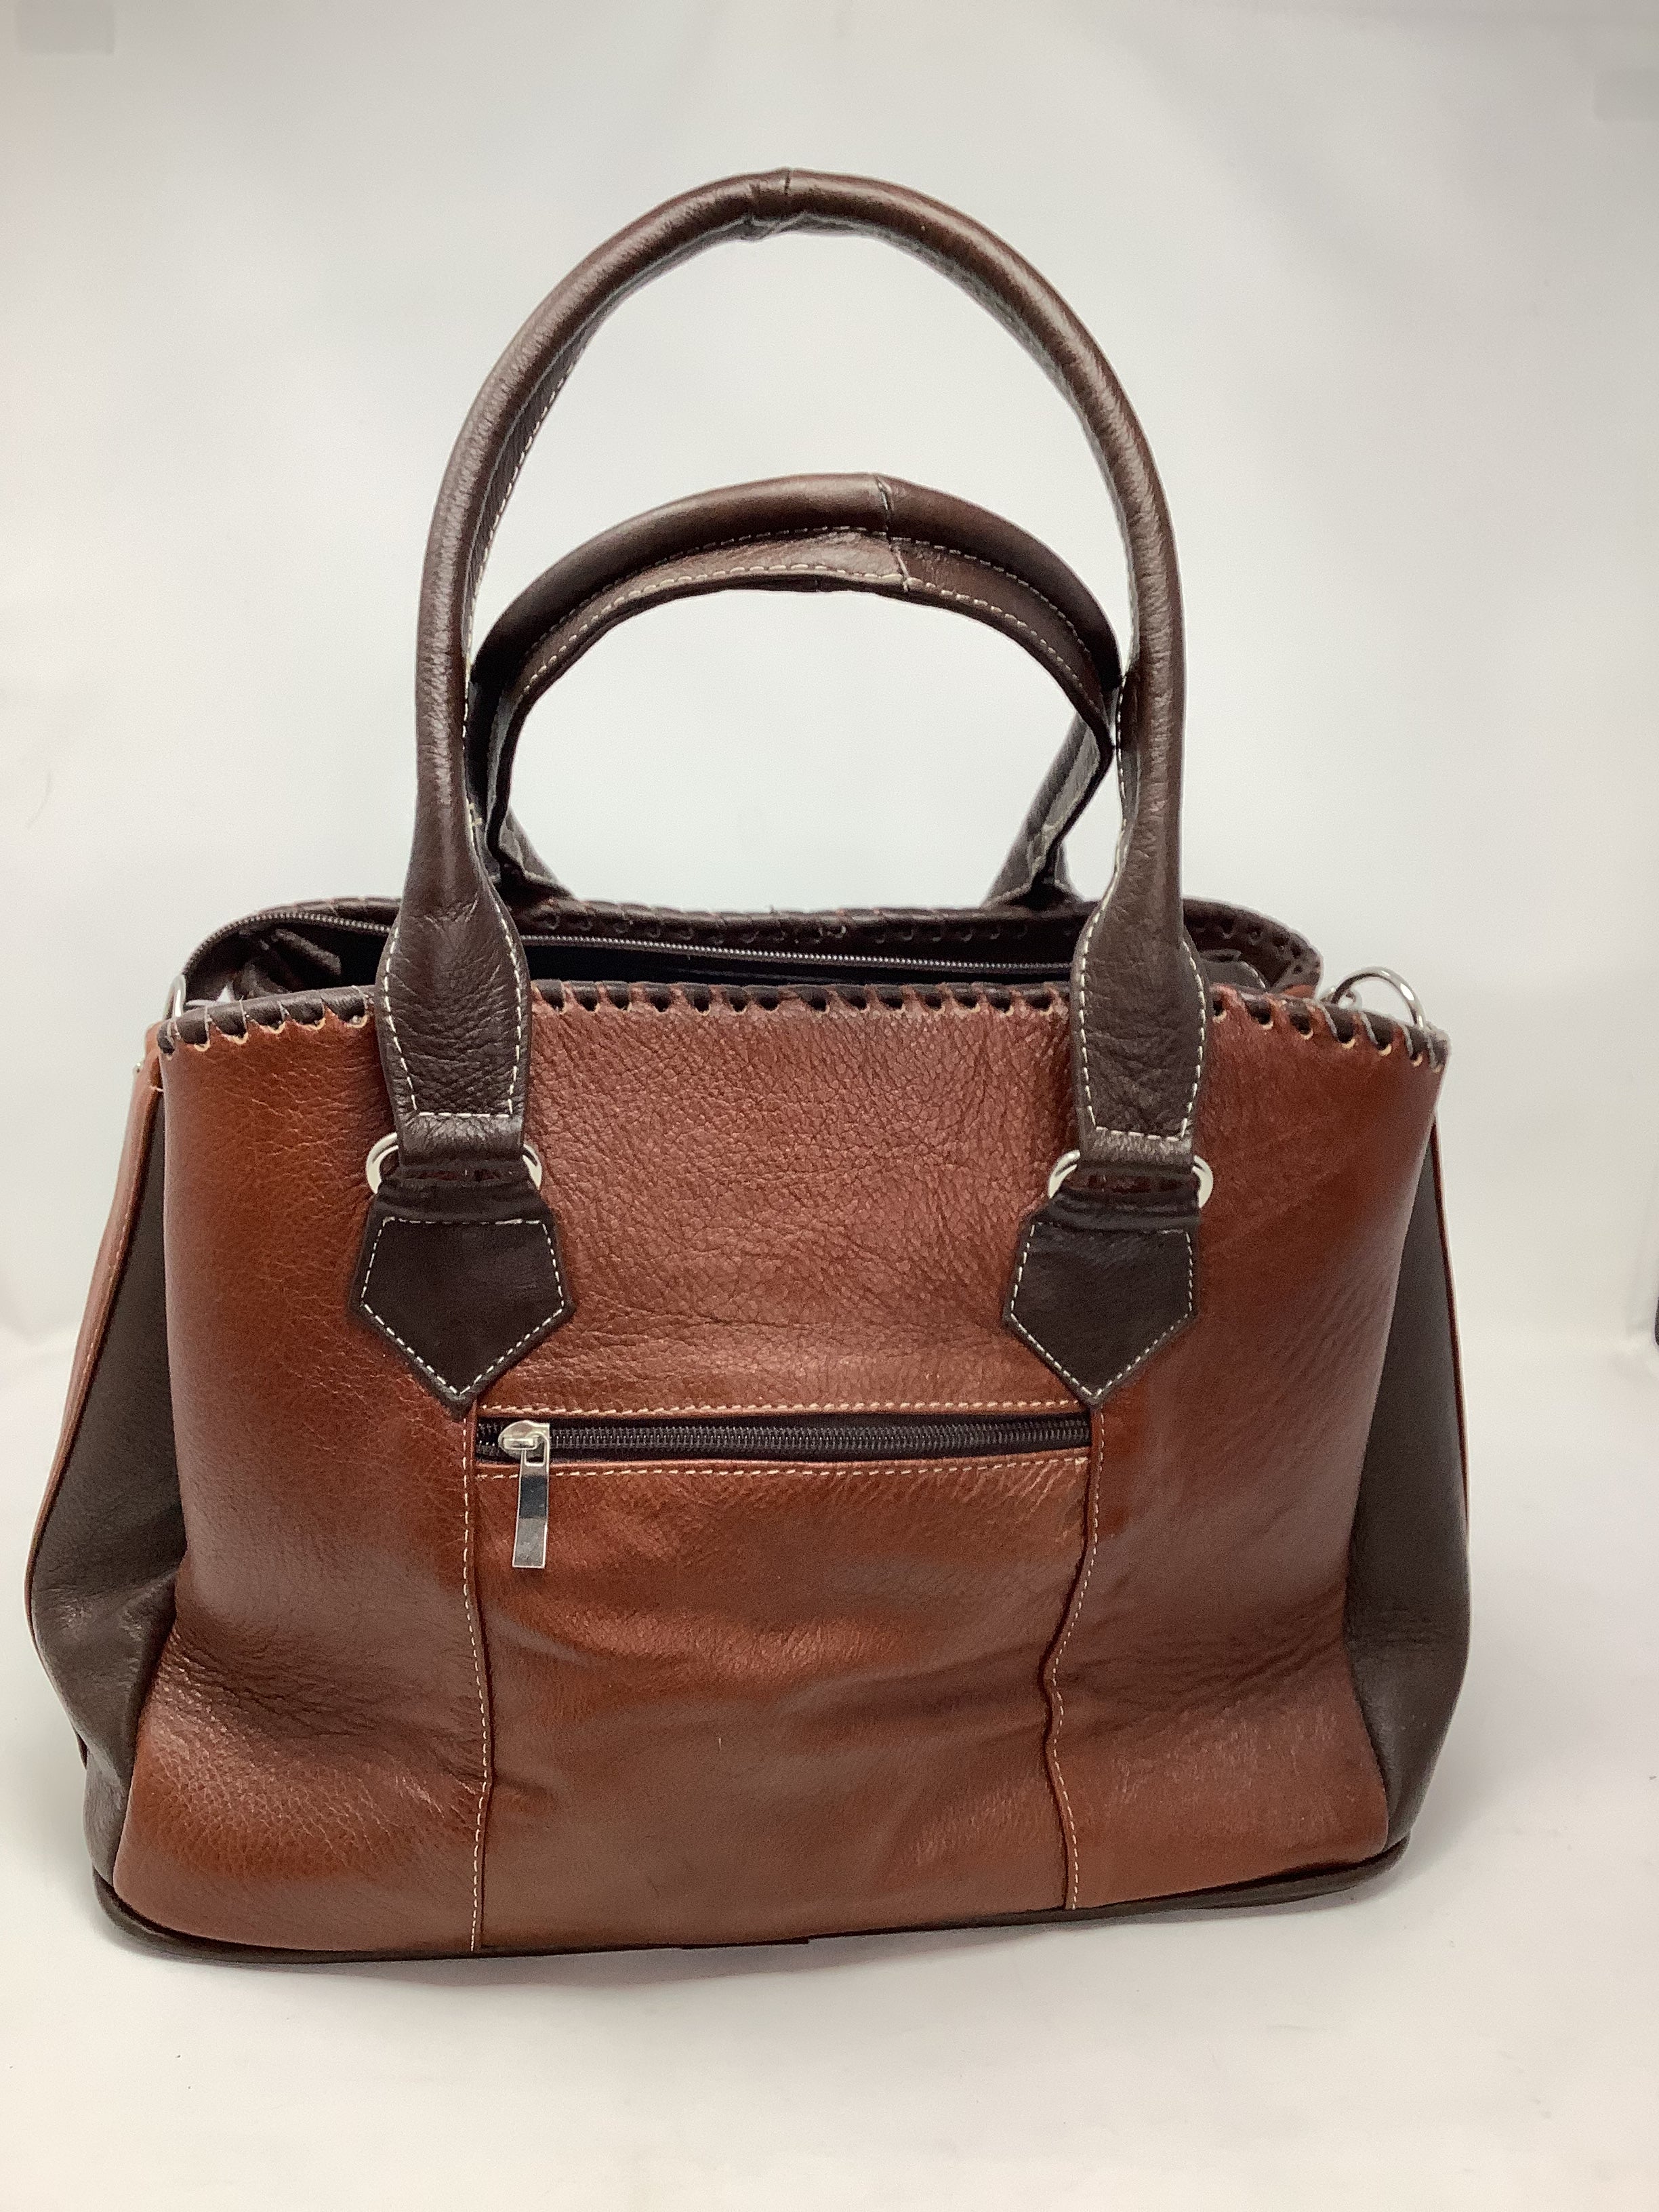 The hard leather hand bag